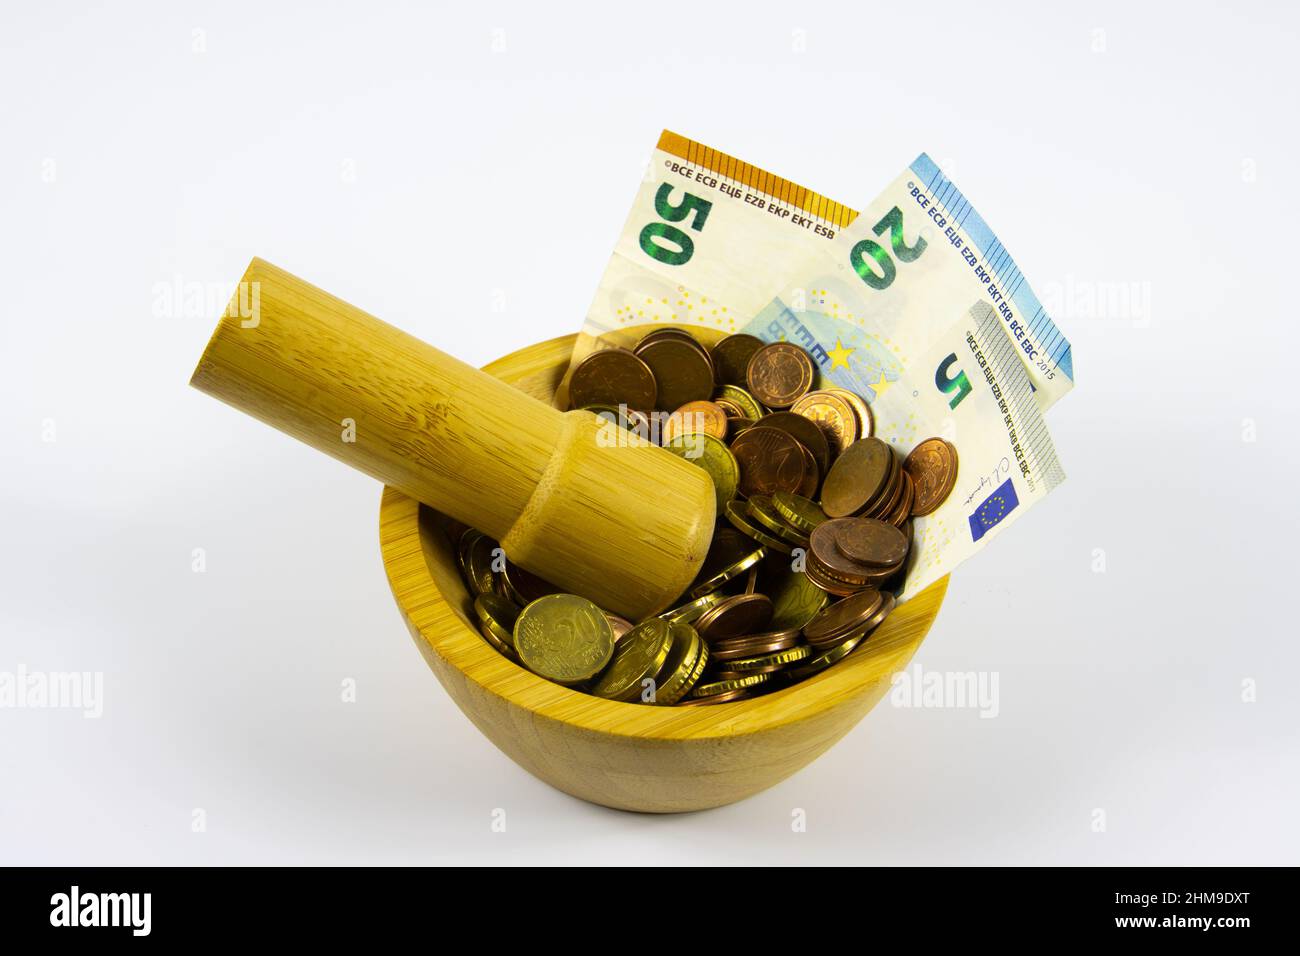 Financial Concept of Inflation - Euro Bills crushed to coins in a mortar grinded by a pestle Stock Photo